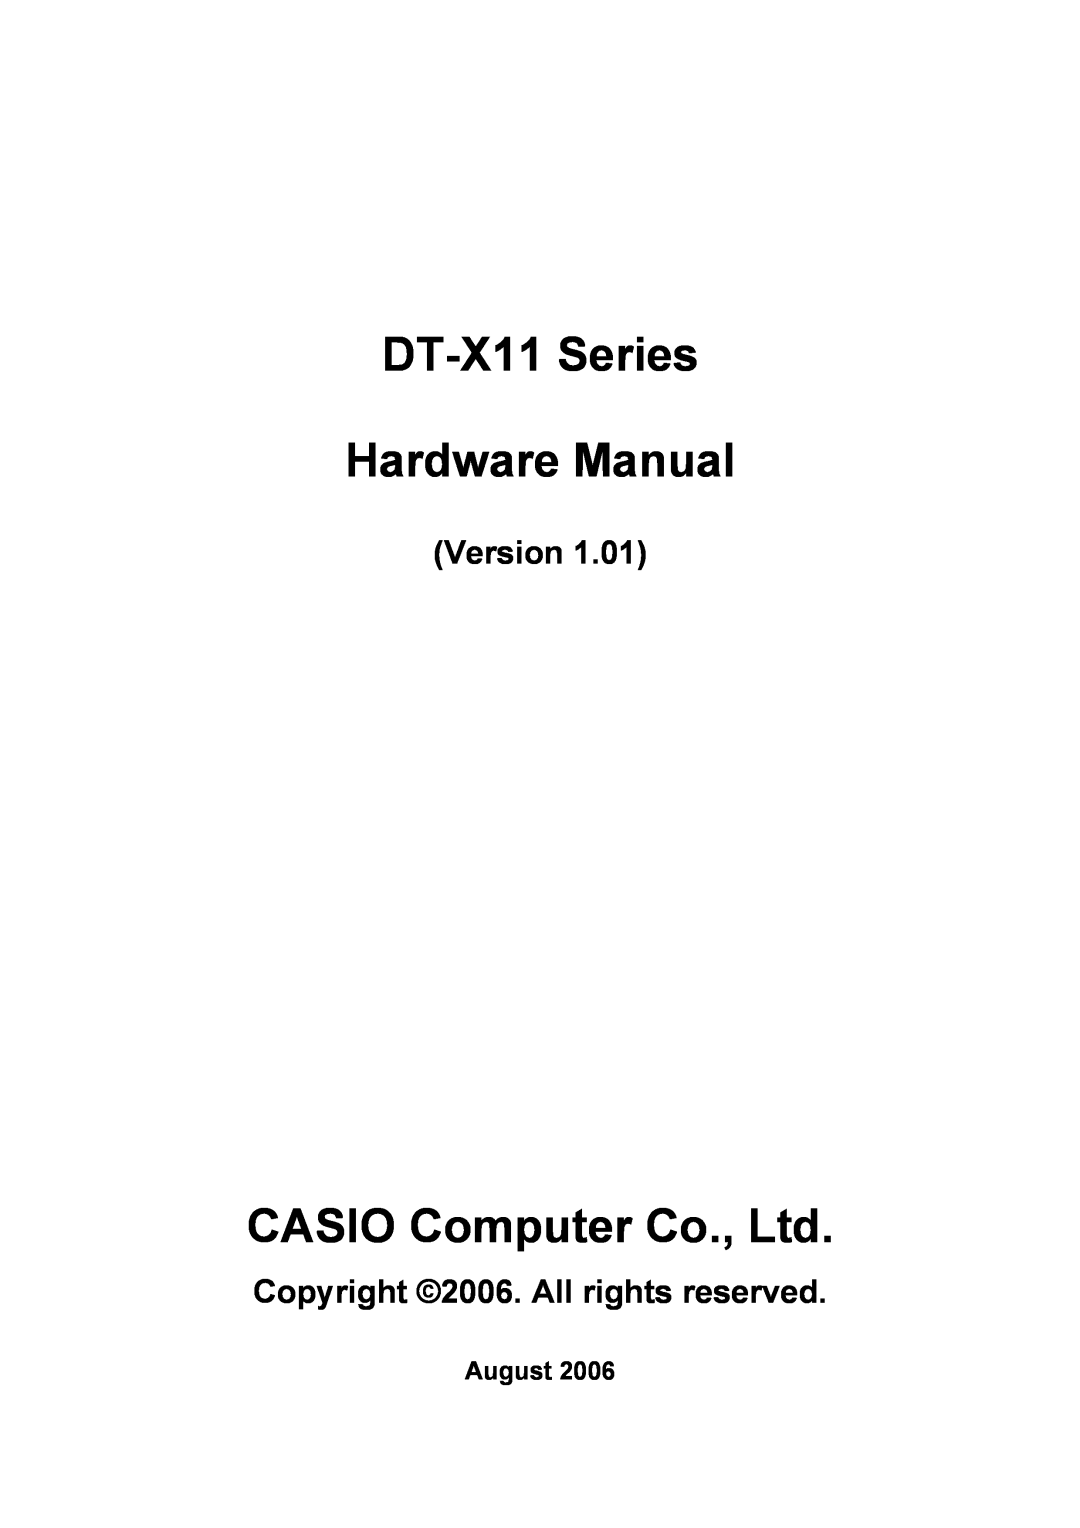 Casio handheld terminals manual August, DT-X11 Series Hardware Manual, Version, Copyright 2006. All rights reserved 